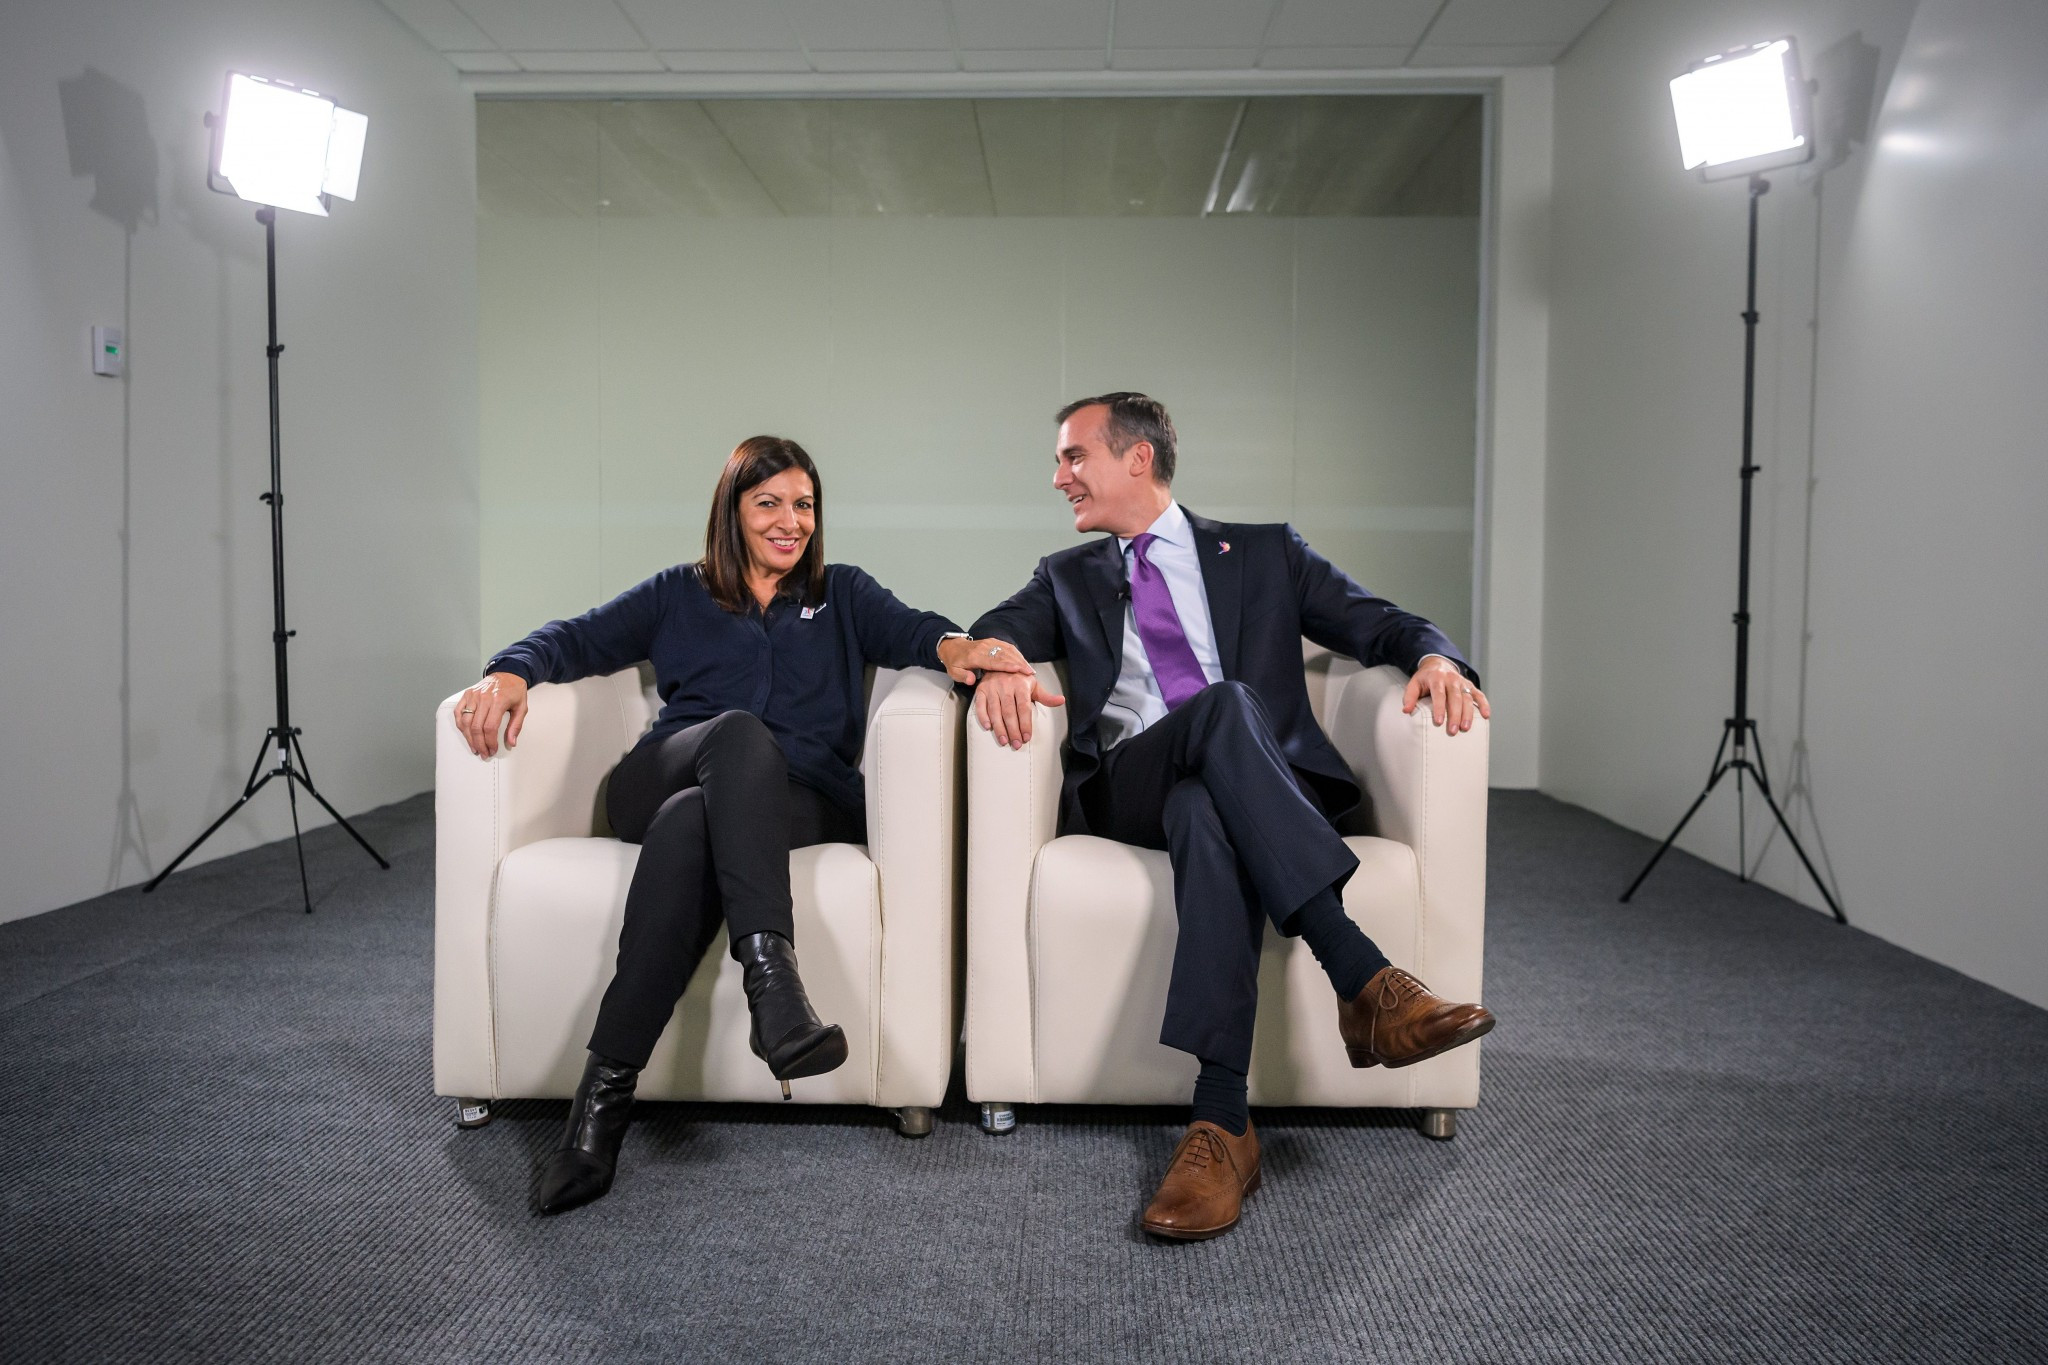 Paris Mayor Anne Hidalgo met with her Los Angeles counterpart Eric Garcetti prior to the double Olympic award ©Getty Images